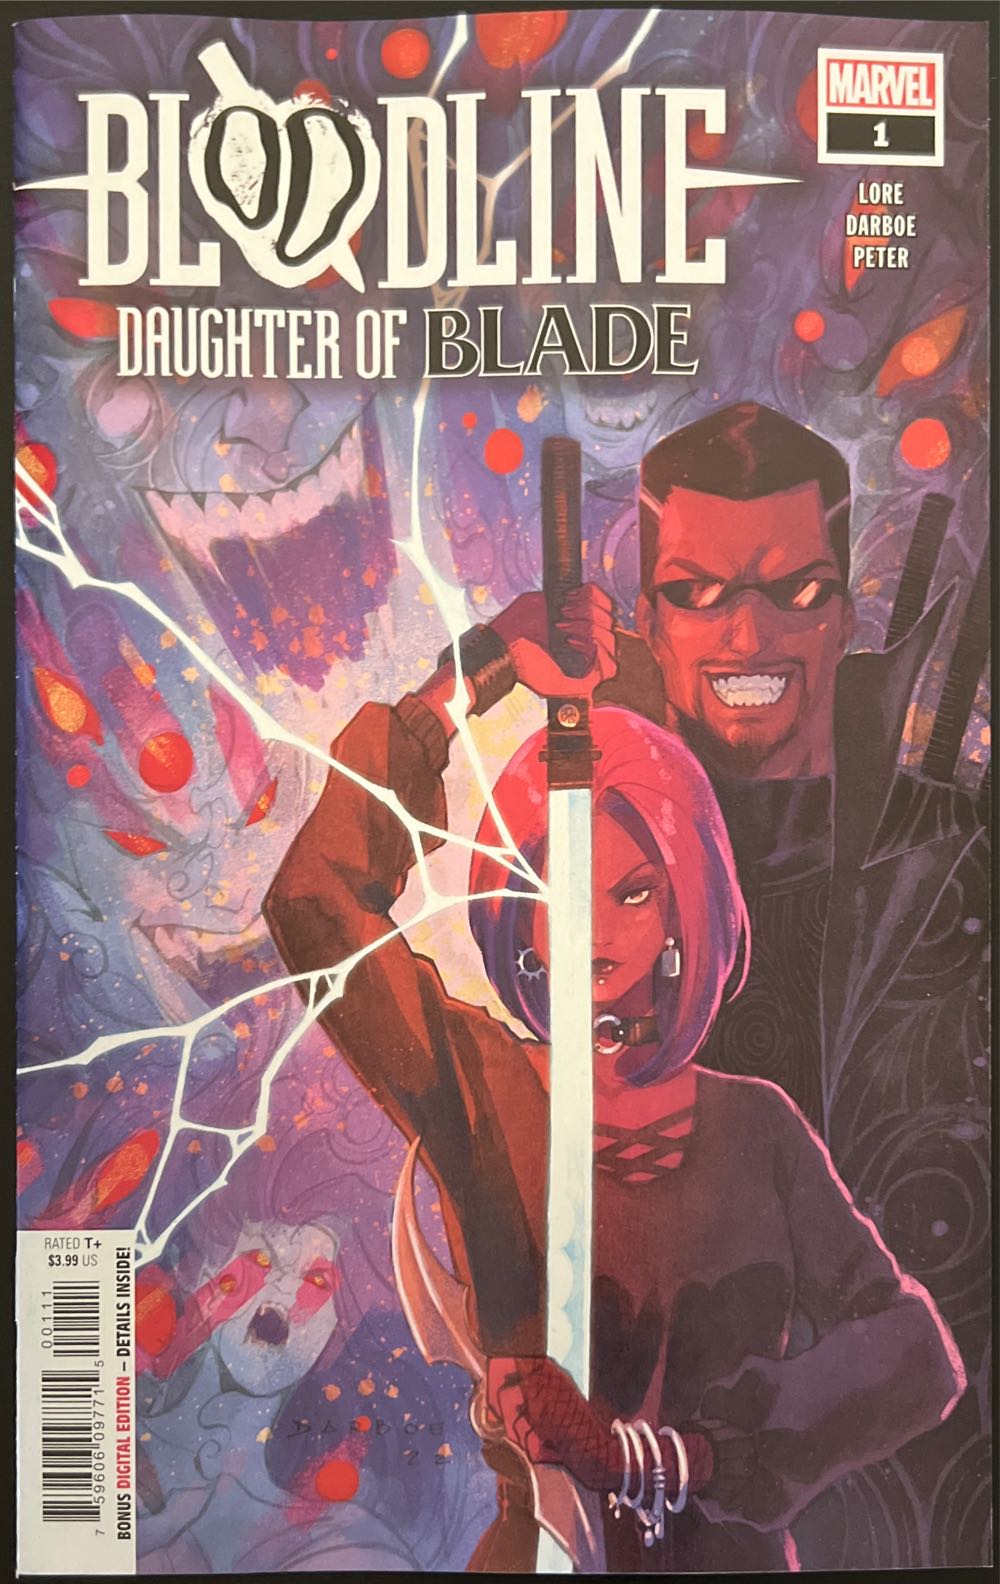 Bloodline: Daughter of Blade - Marvel (1 - Apr 2023) comic book collectible [Barcode 75960609771500111] - Main Image 1